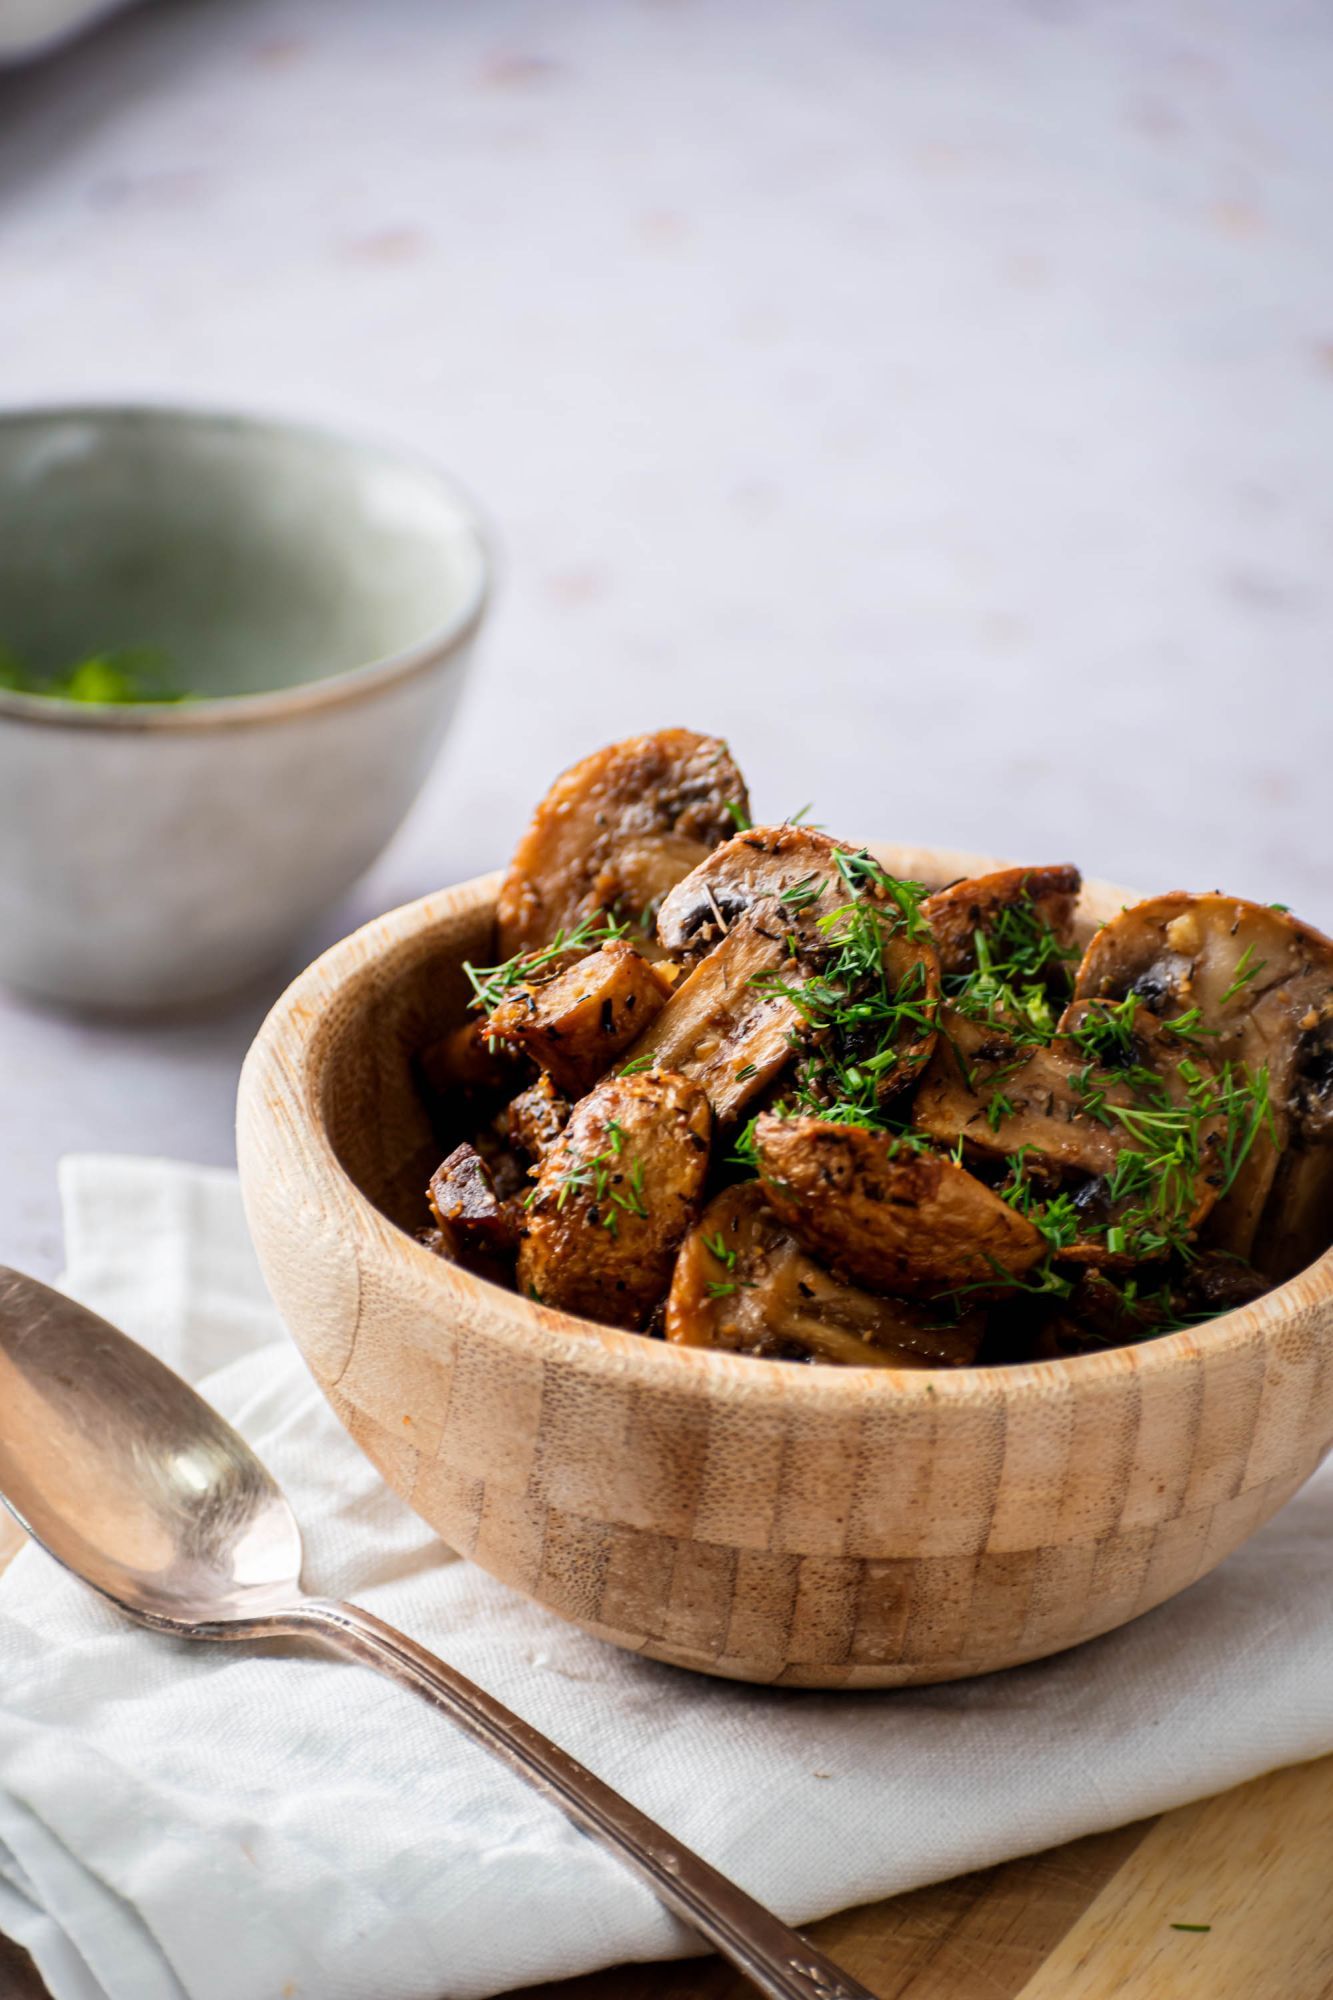 Garlic roasted mushrooms in a wooden bowl with a spoon and herbs on the side.